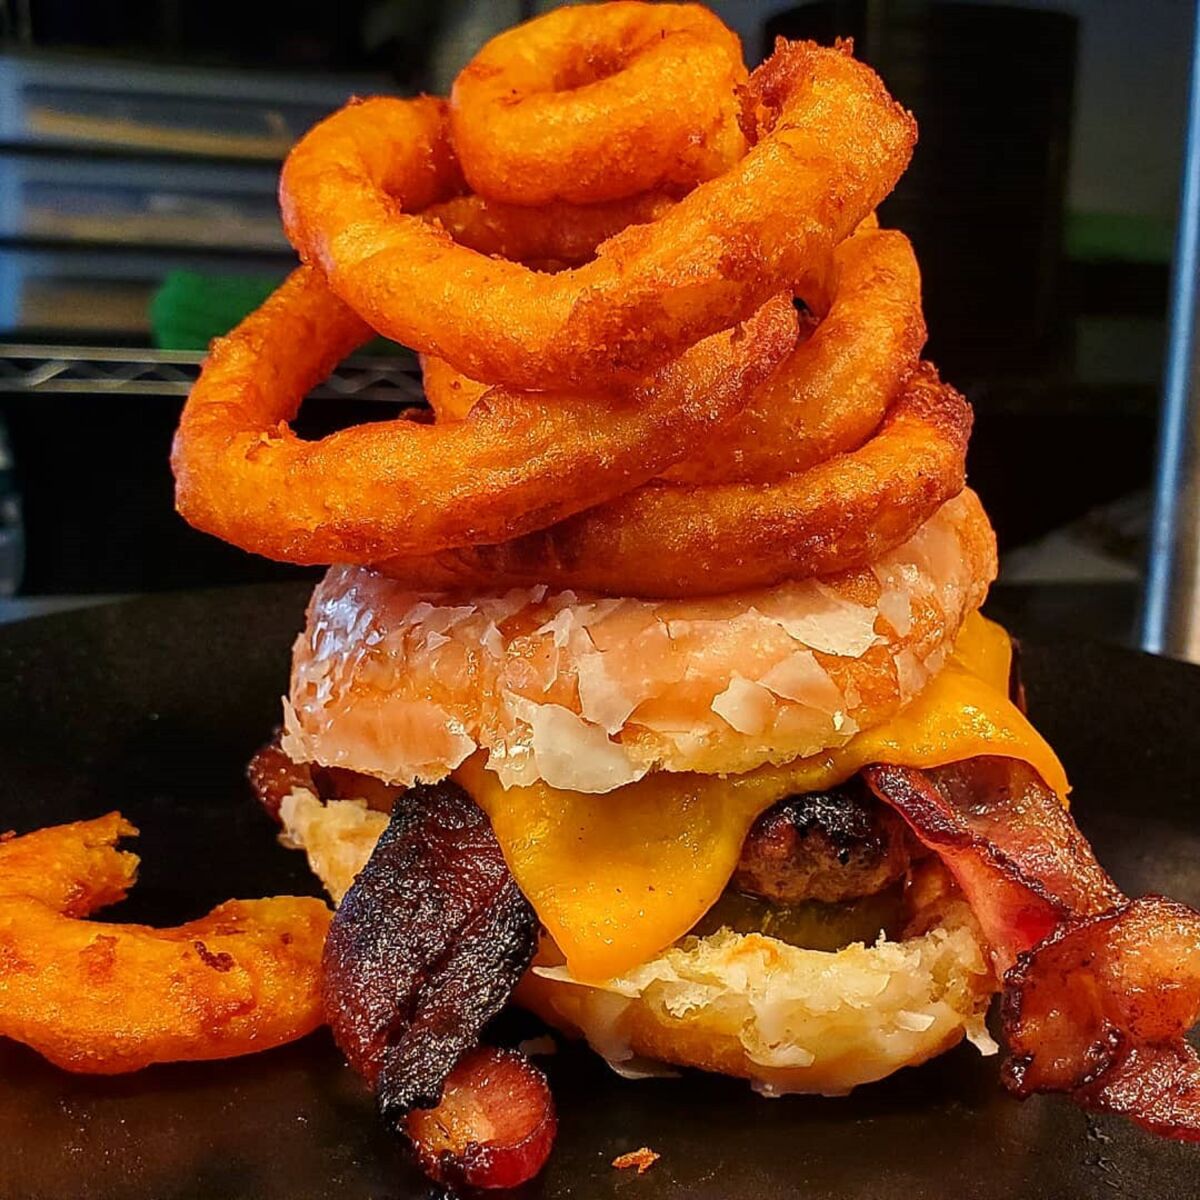 Yes, that burger is sitting inside a doughnut and topped with onion rings. Find it at Louisiana Purchase.